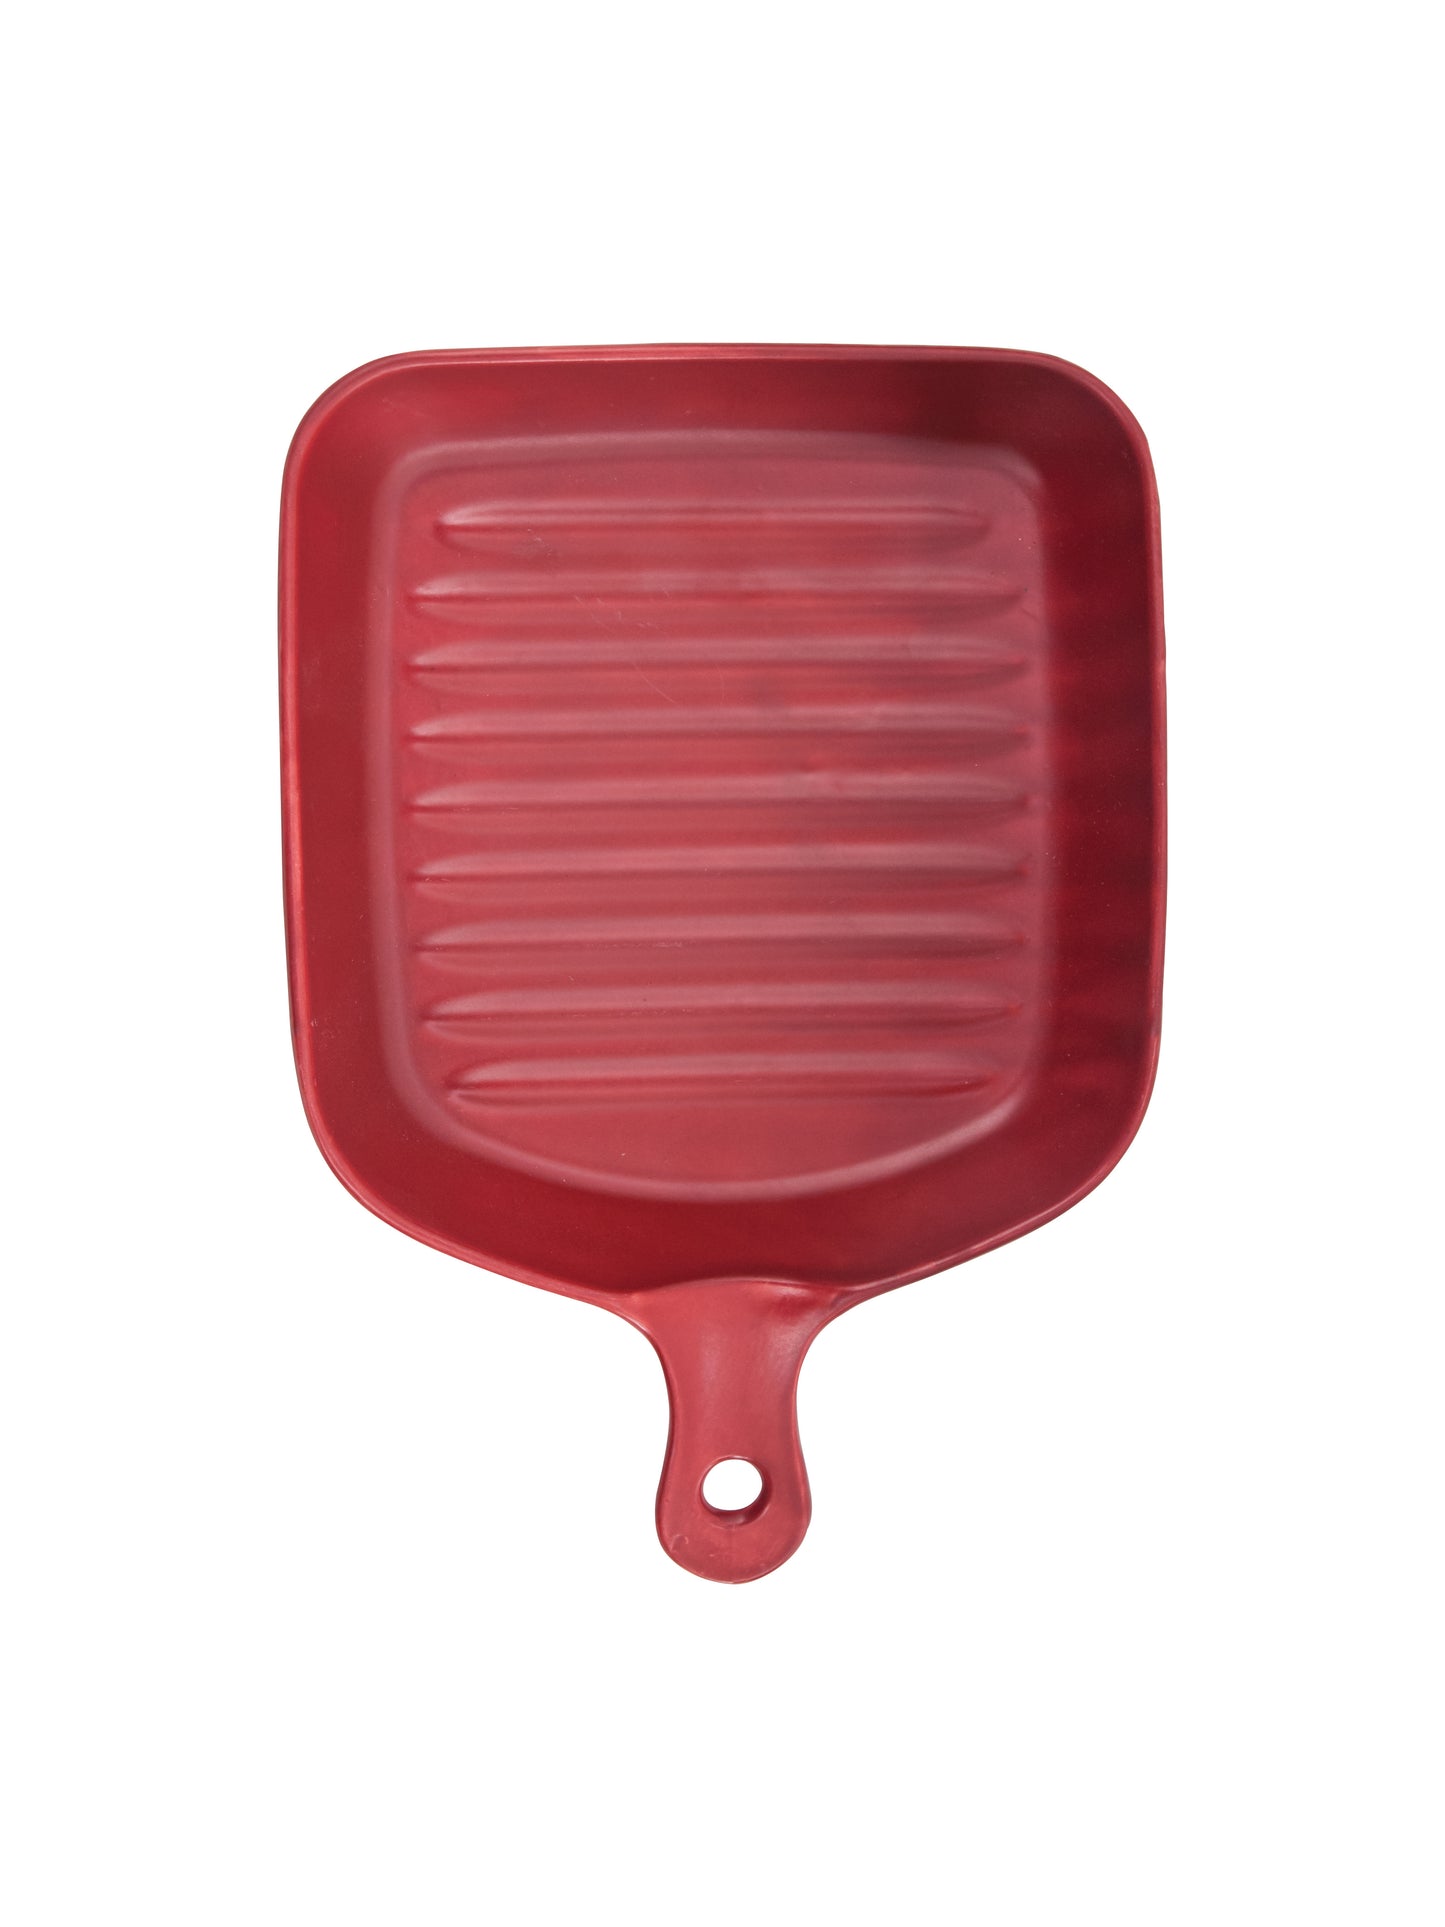 Ceramic Square Grill Plates for Serving, Red